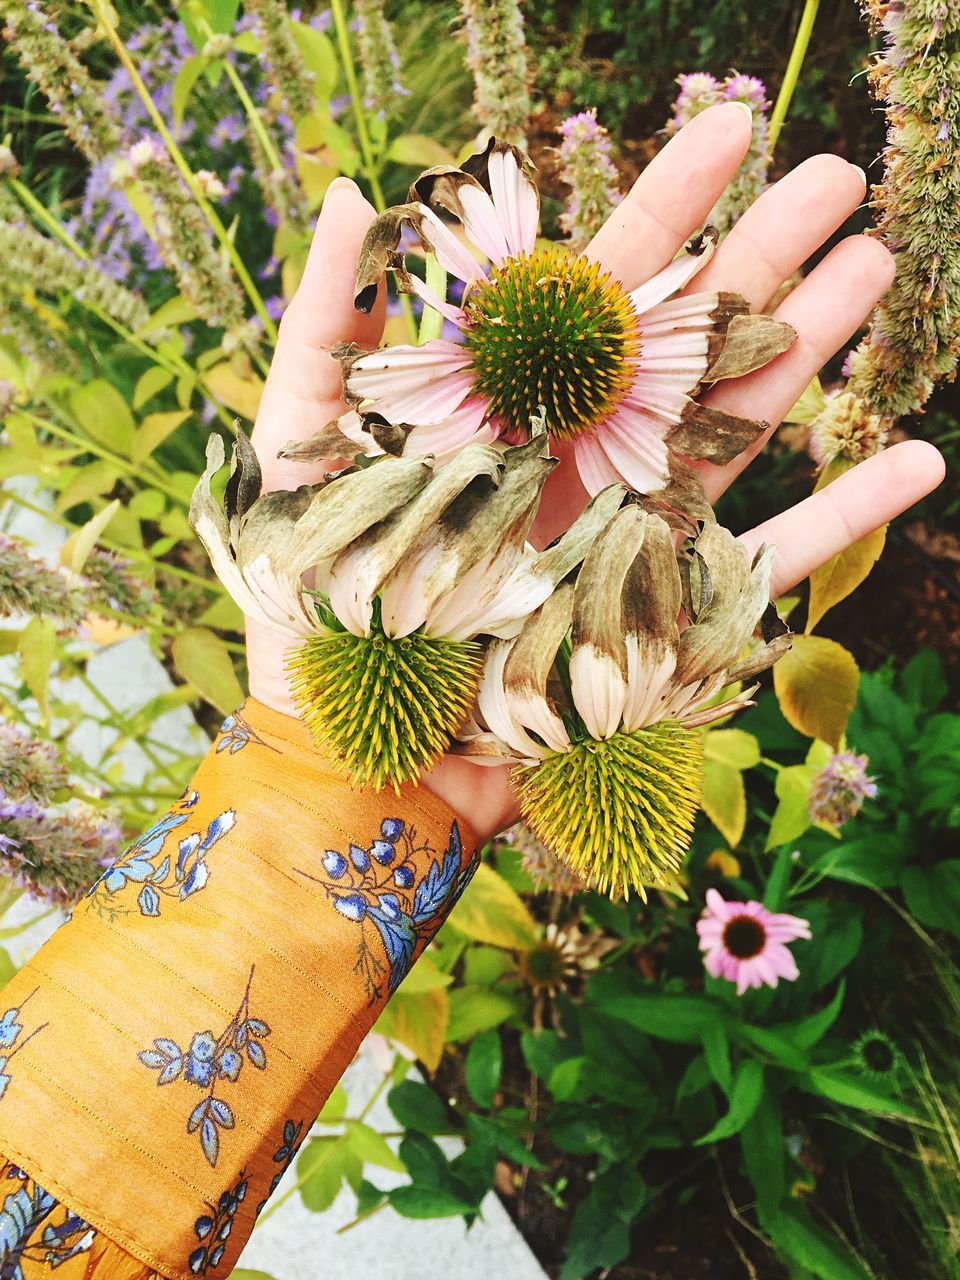 CLOSE-UP OF HAND HOLDING FLOWERING PLANTS